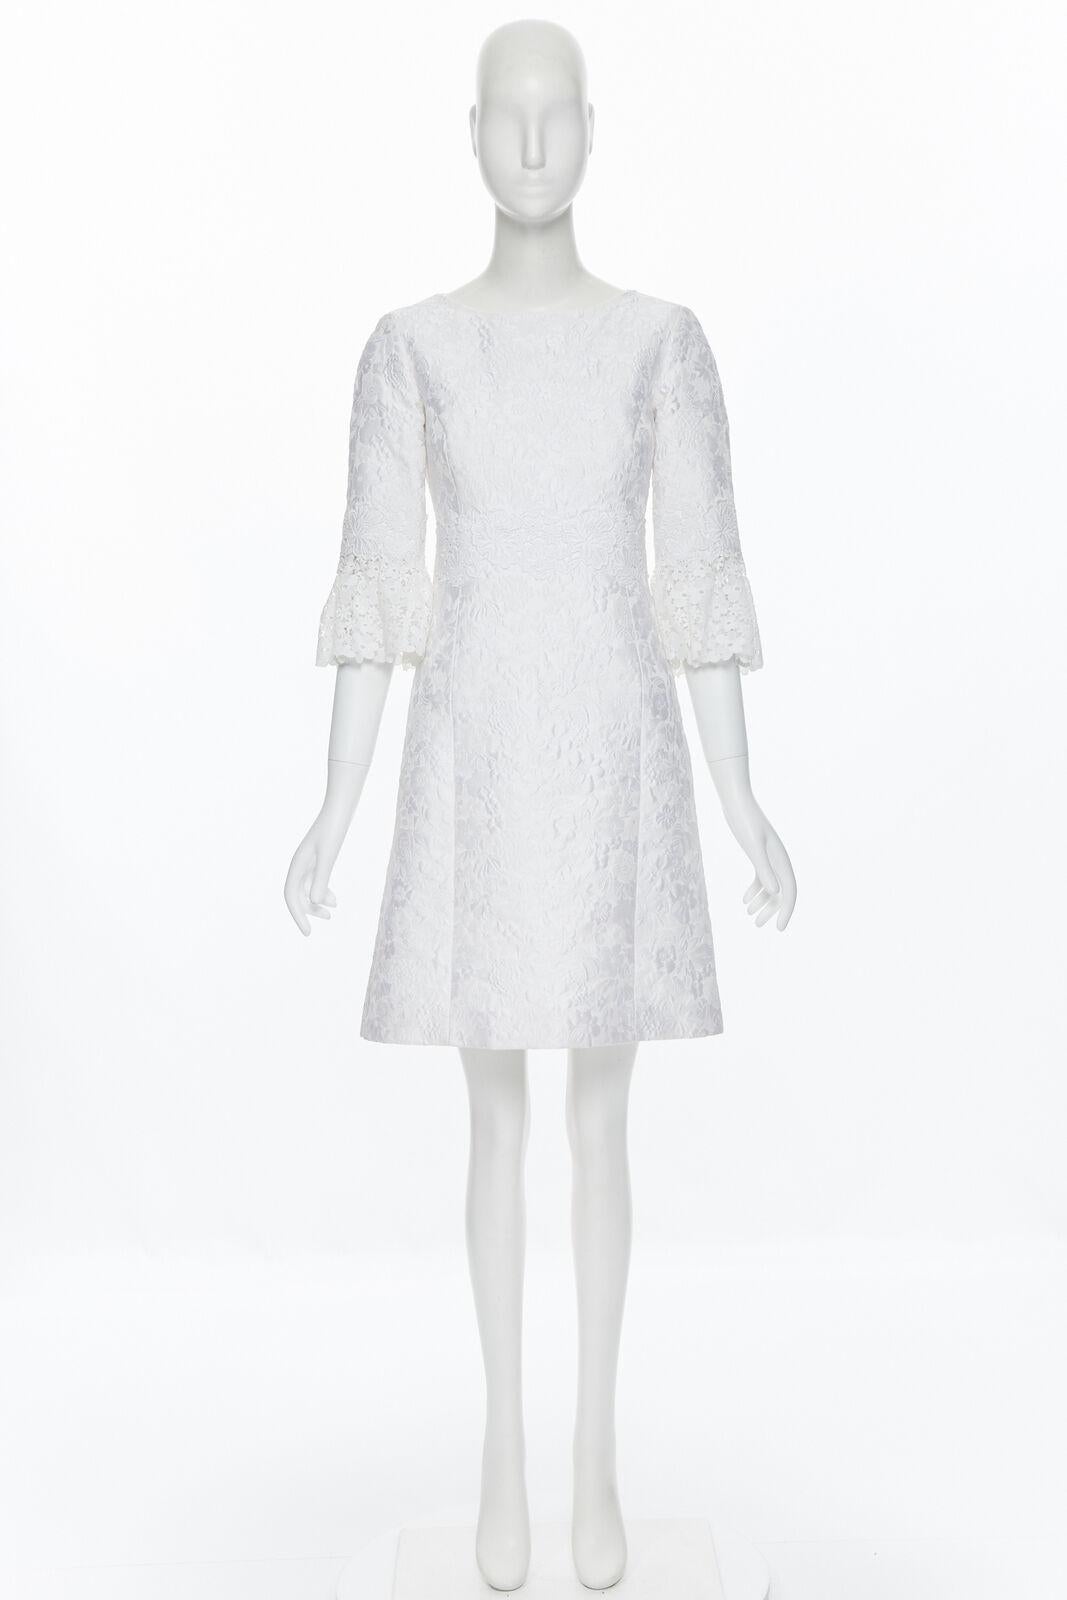 Gray MICHAEL KORS COLLECTION white floral cloque lace trimmed 3/4 sleeve dress US0 For Sale